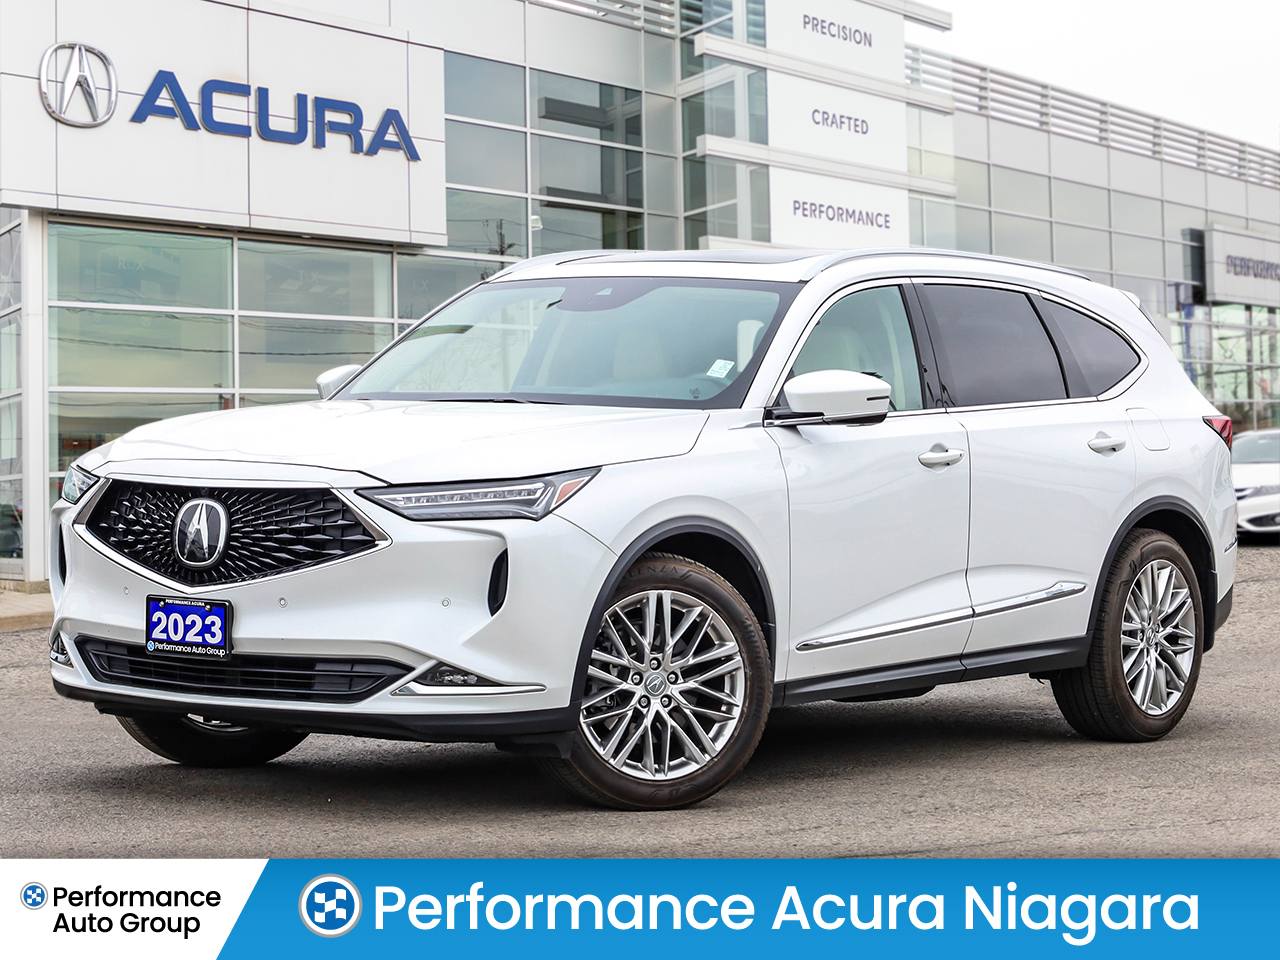 2023 Acura MDX SOLD - PENDING DELIVERY